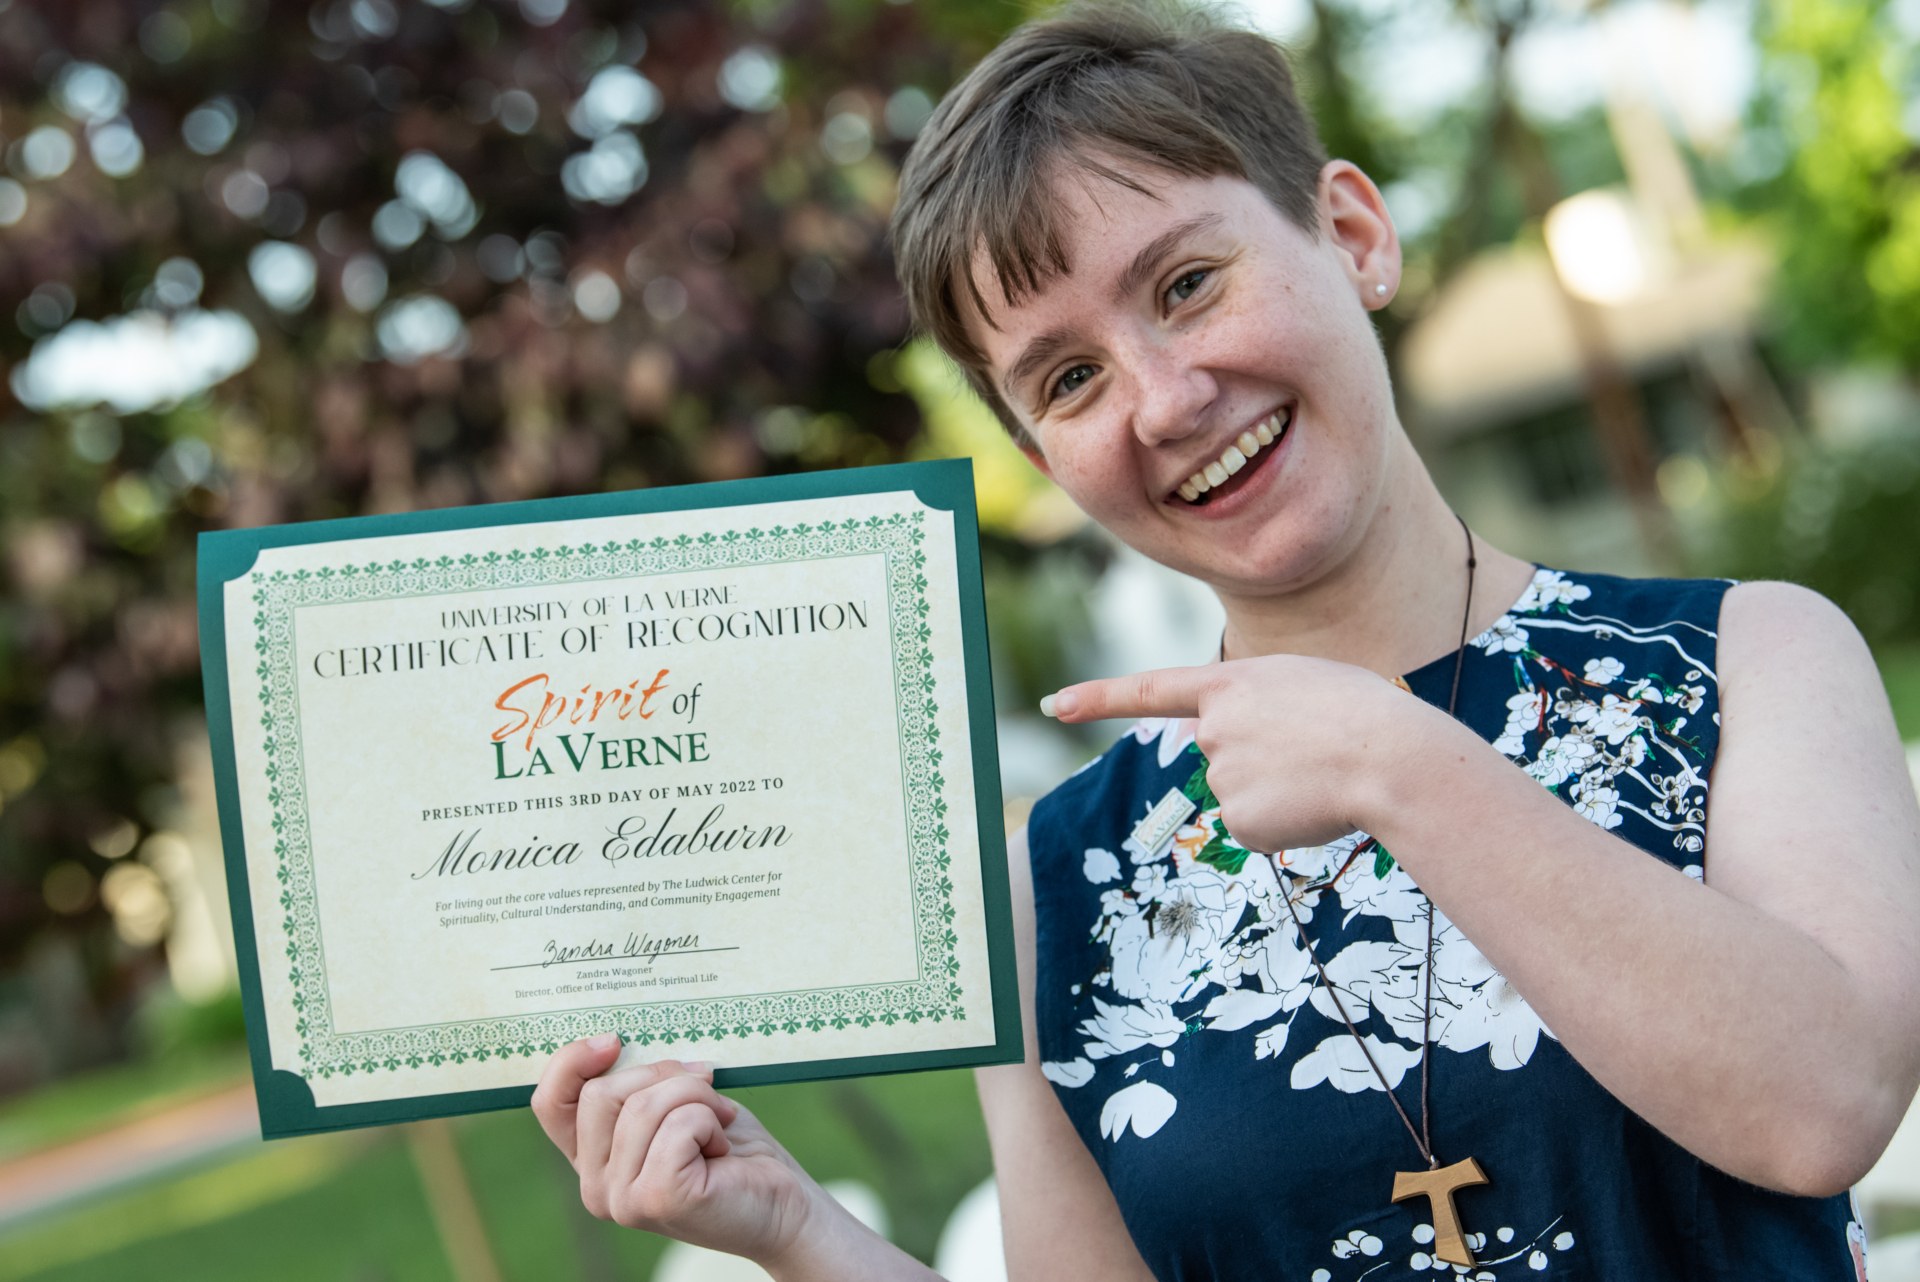 Student Monica Edaburn with her certificate of recognition at the 2022 Spirit of La Verne celebration.